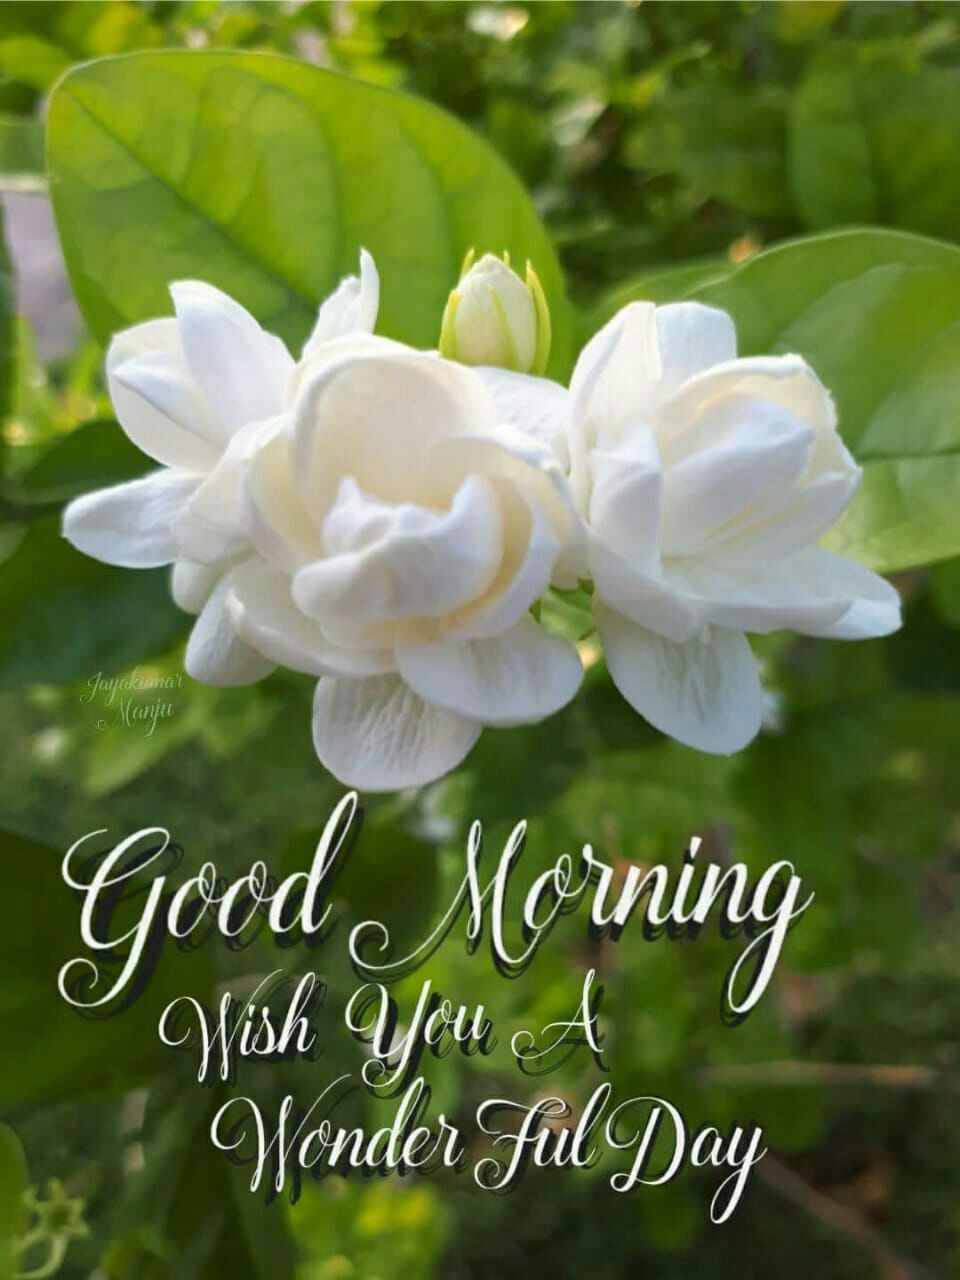 Good Morning Jasmine HD Images For WhatsApp